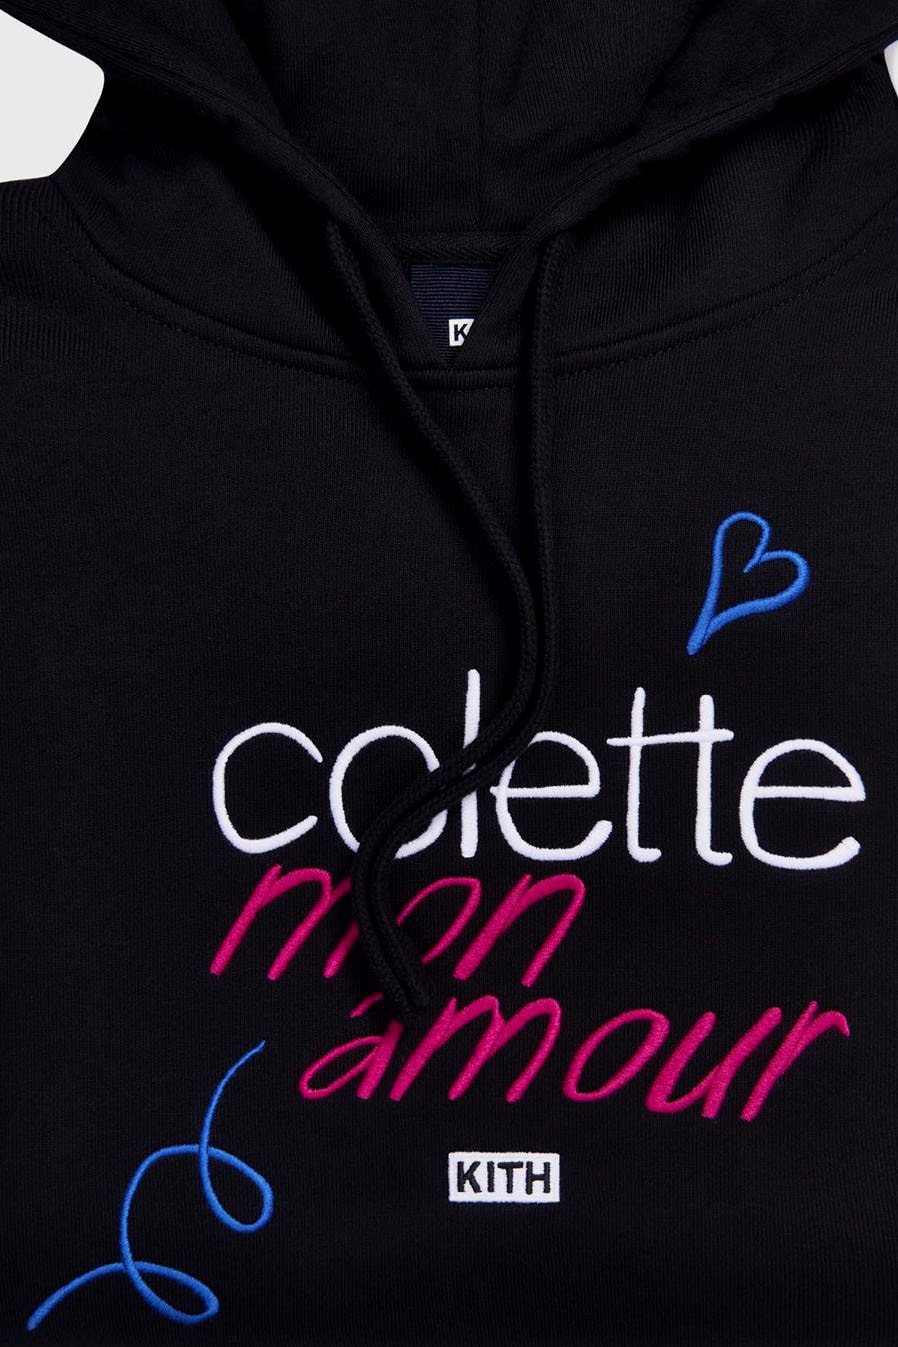 Ronnie Fieg Releases Special colette x KITH Hoodie collaborations paris homage Colette, Mon Amour documentary pop up